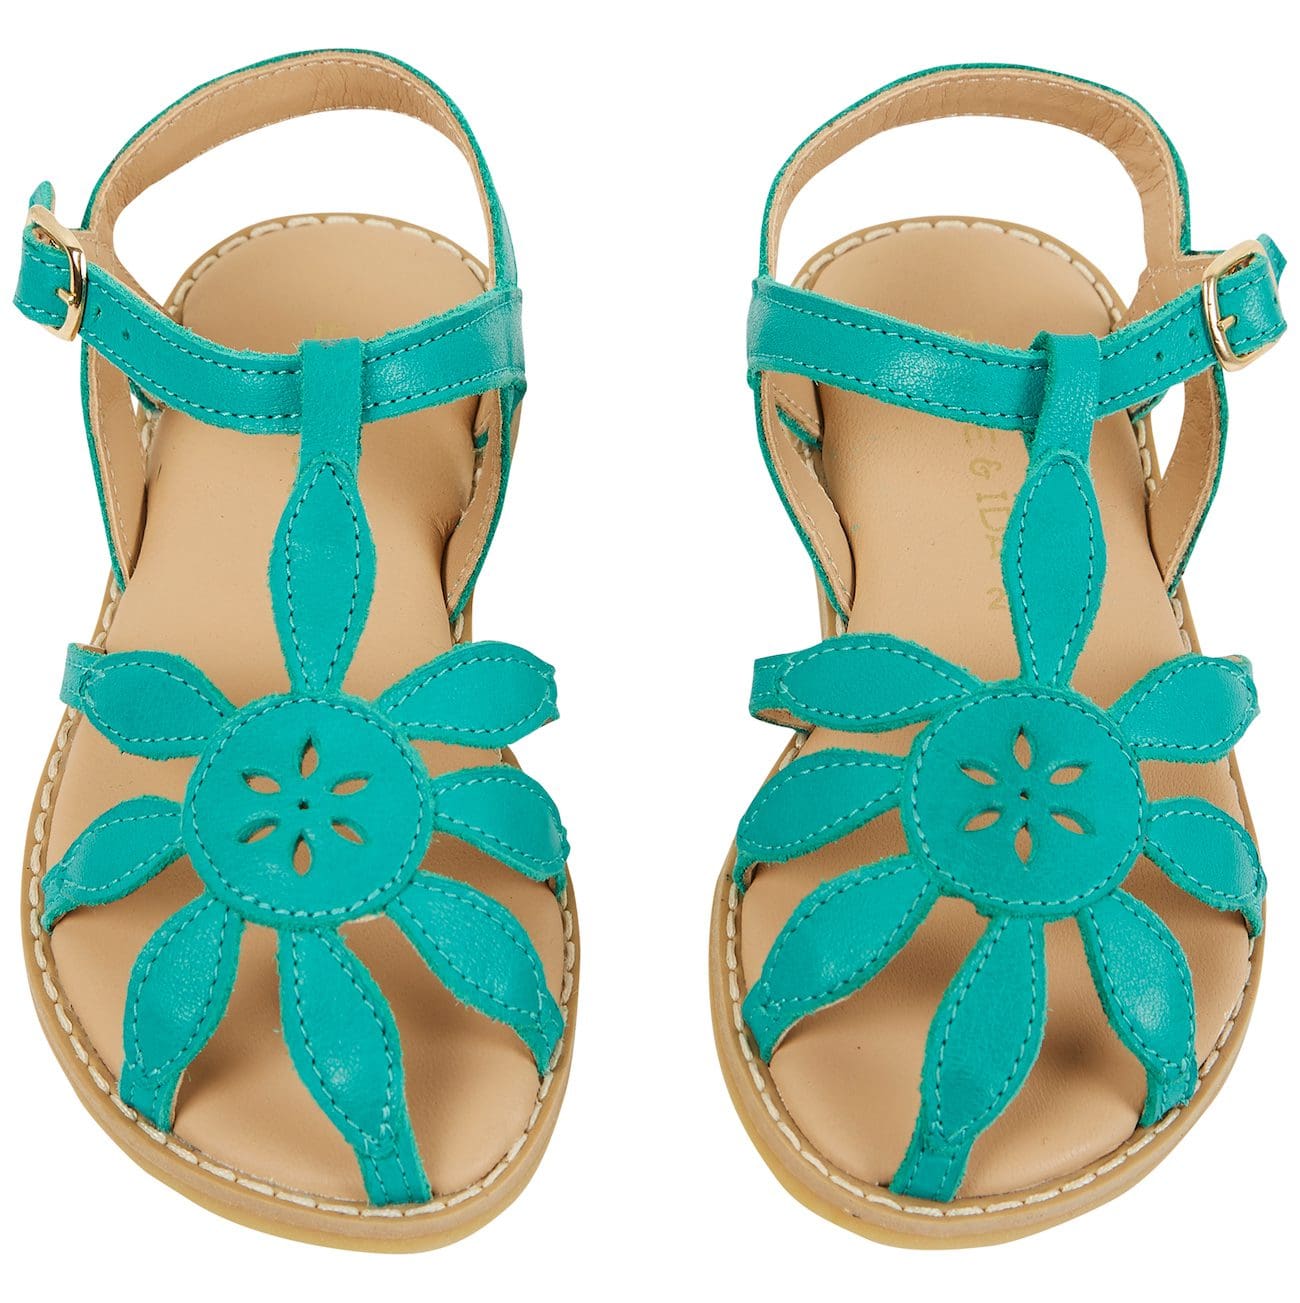 Turqouise Goat Leather Sandals – Ivy Babies